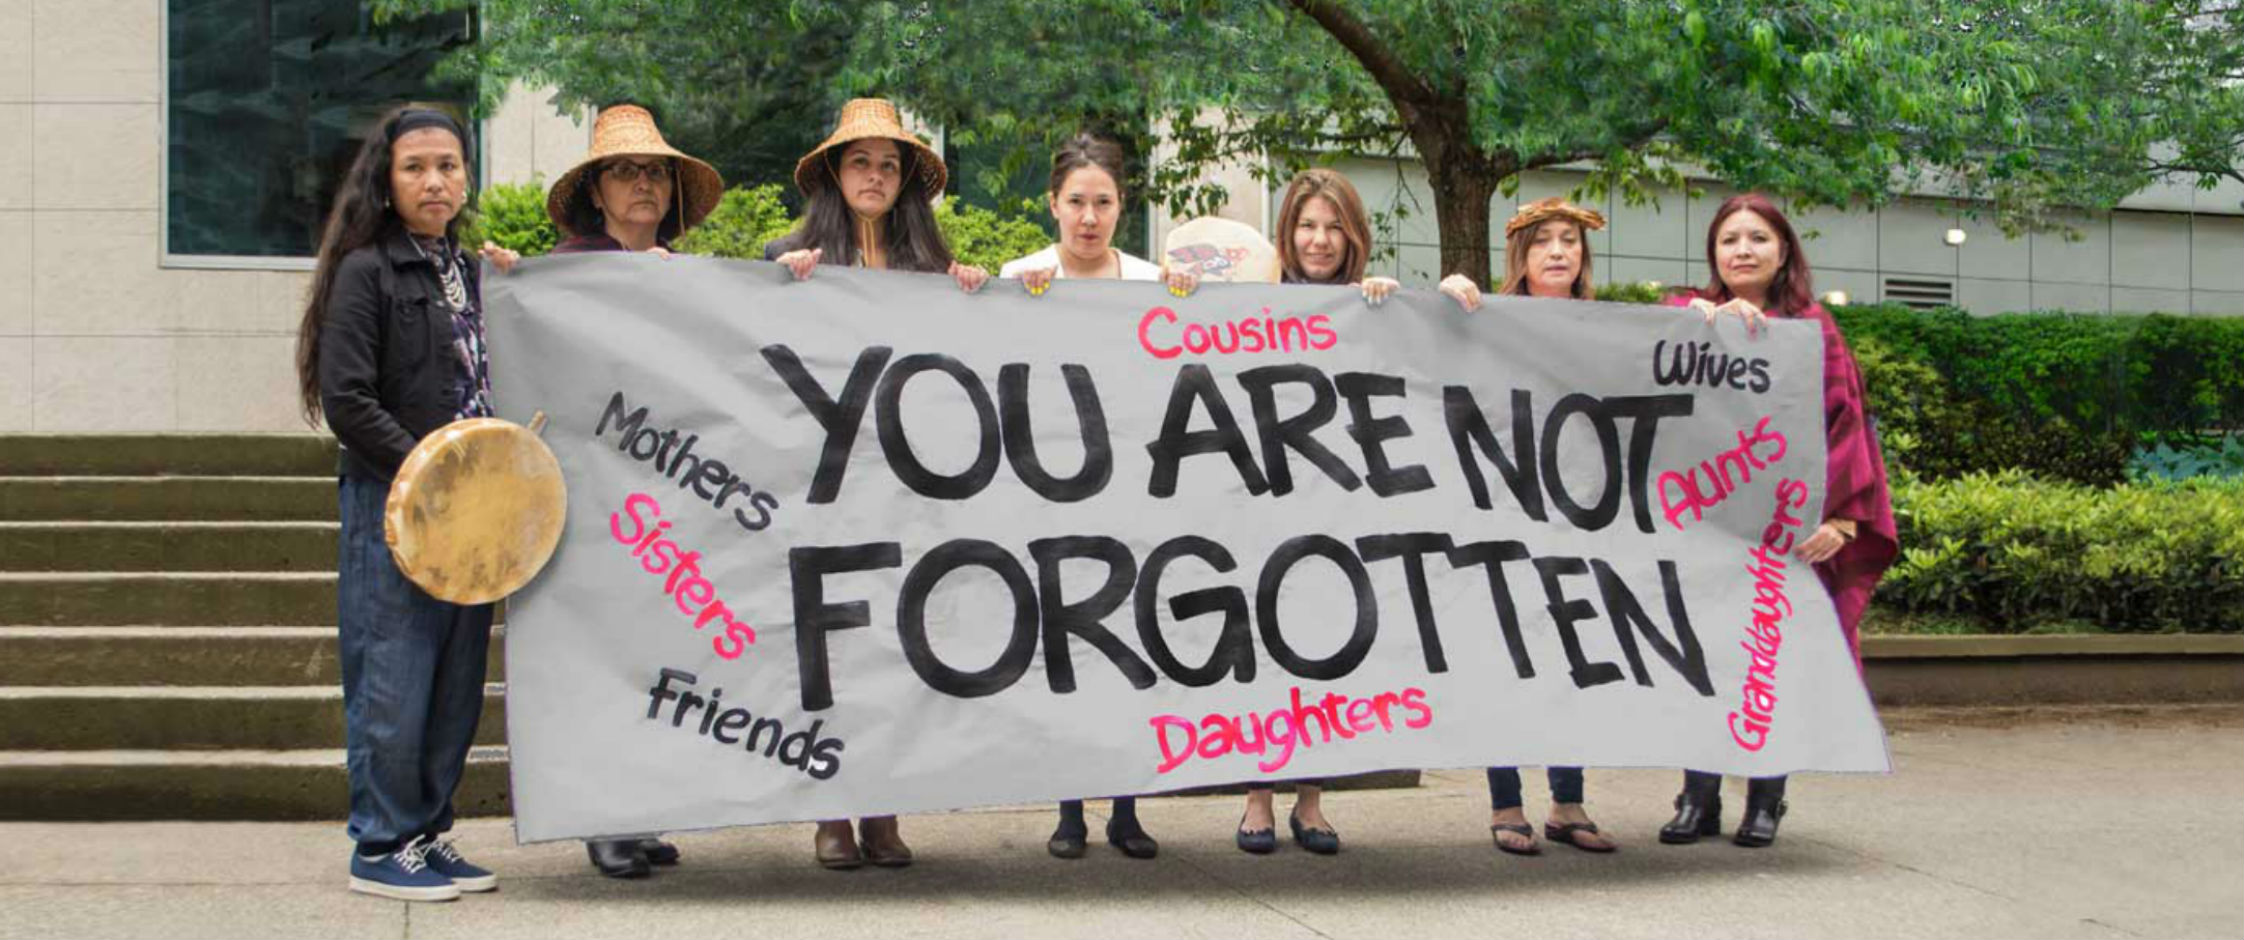 Women holding a sign that says You are not forgotten